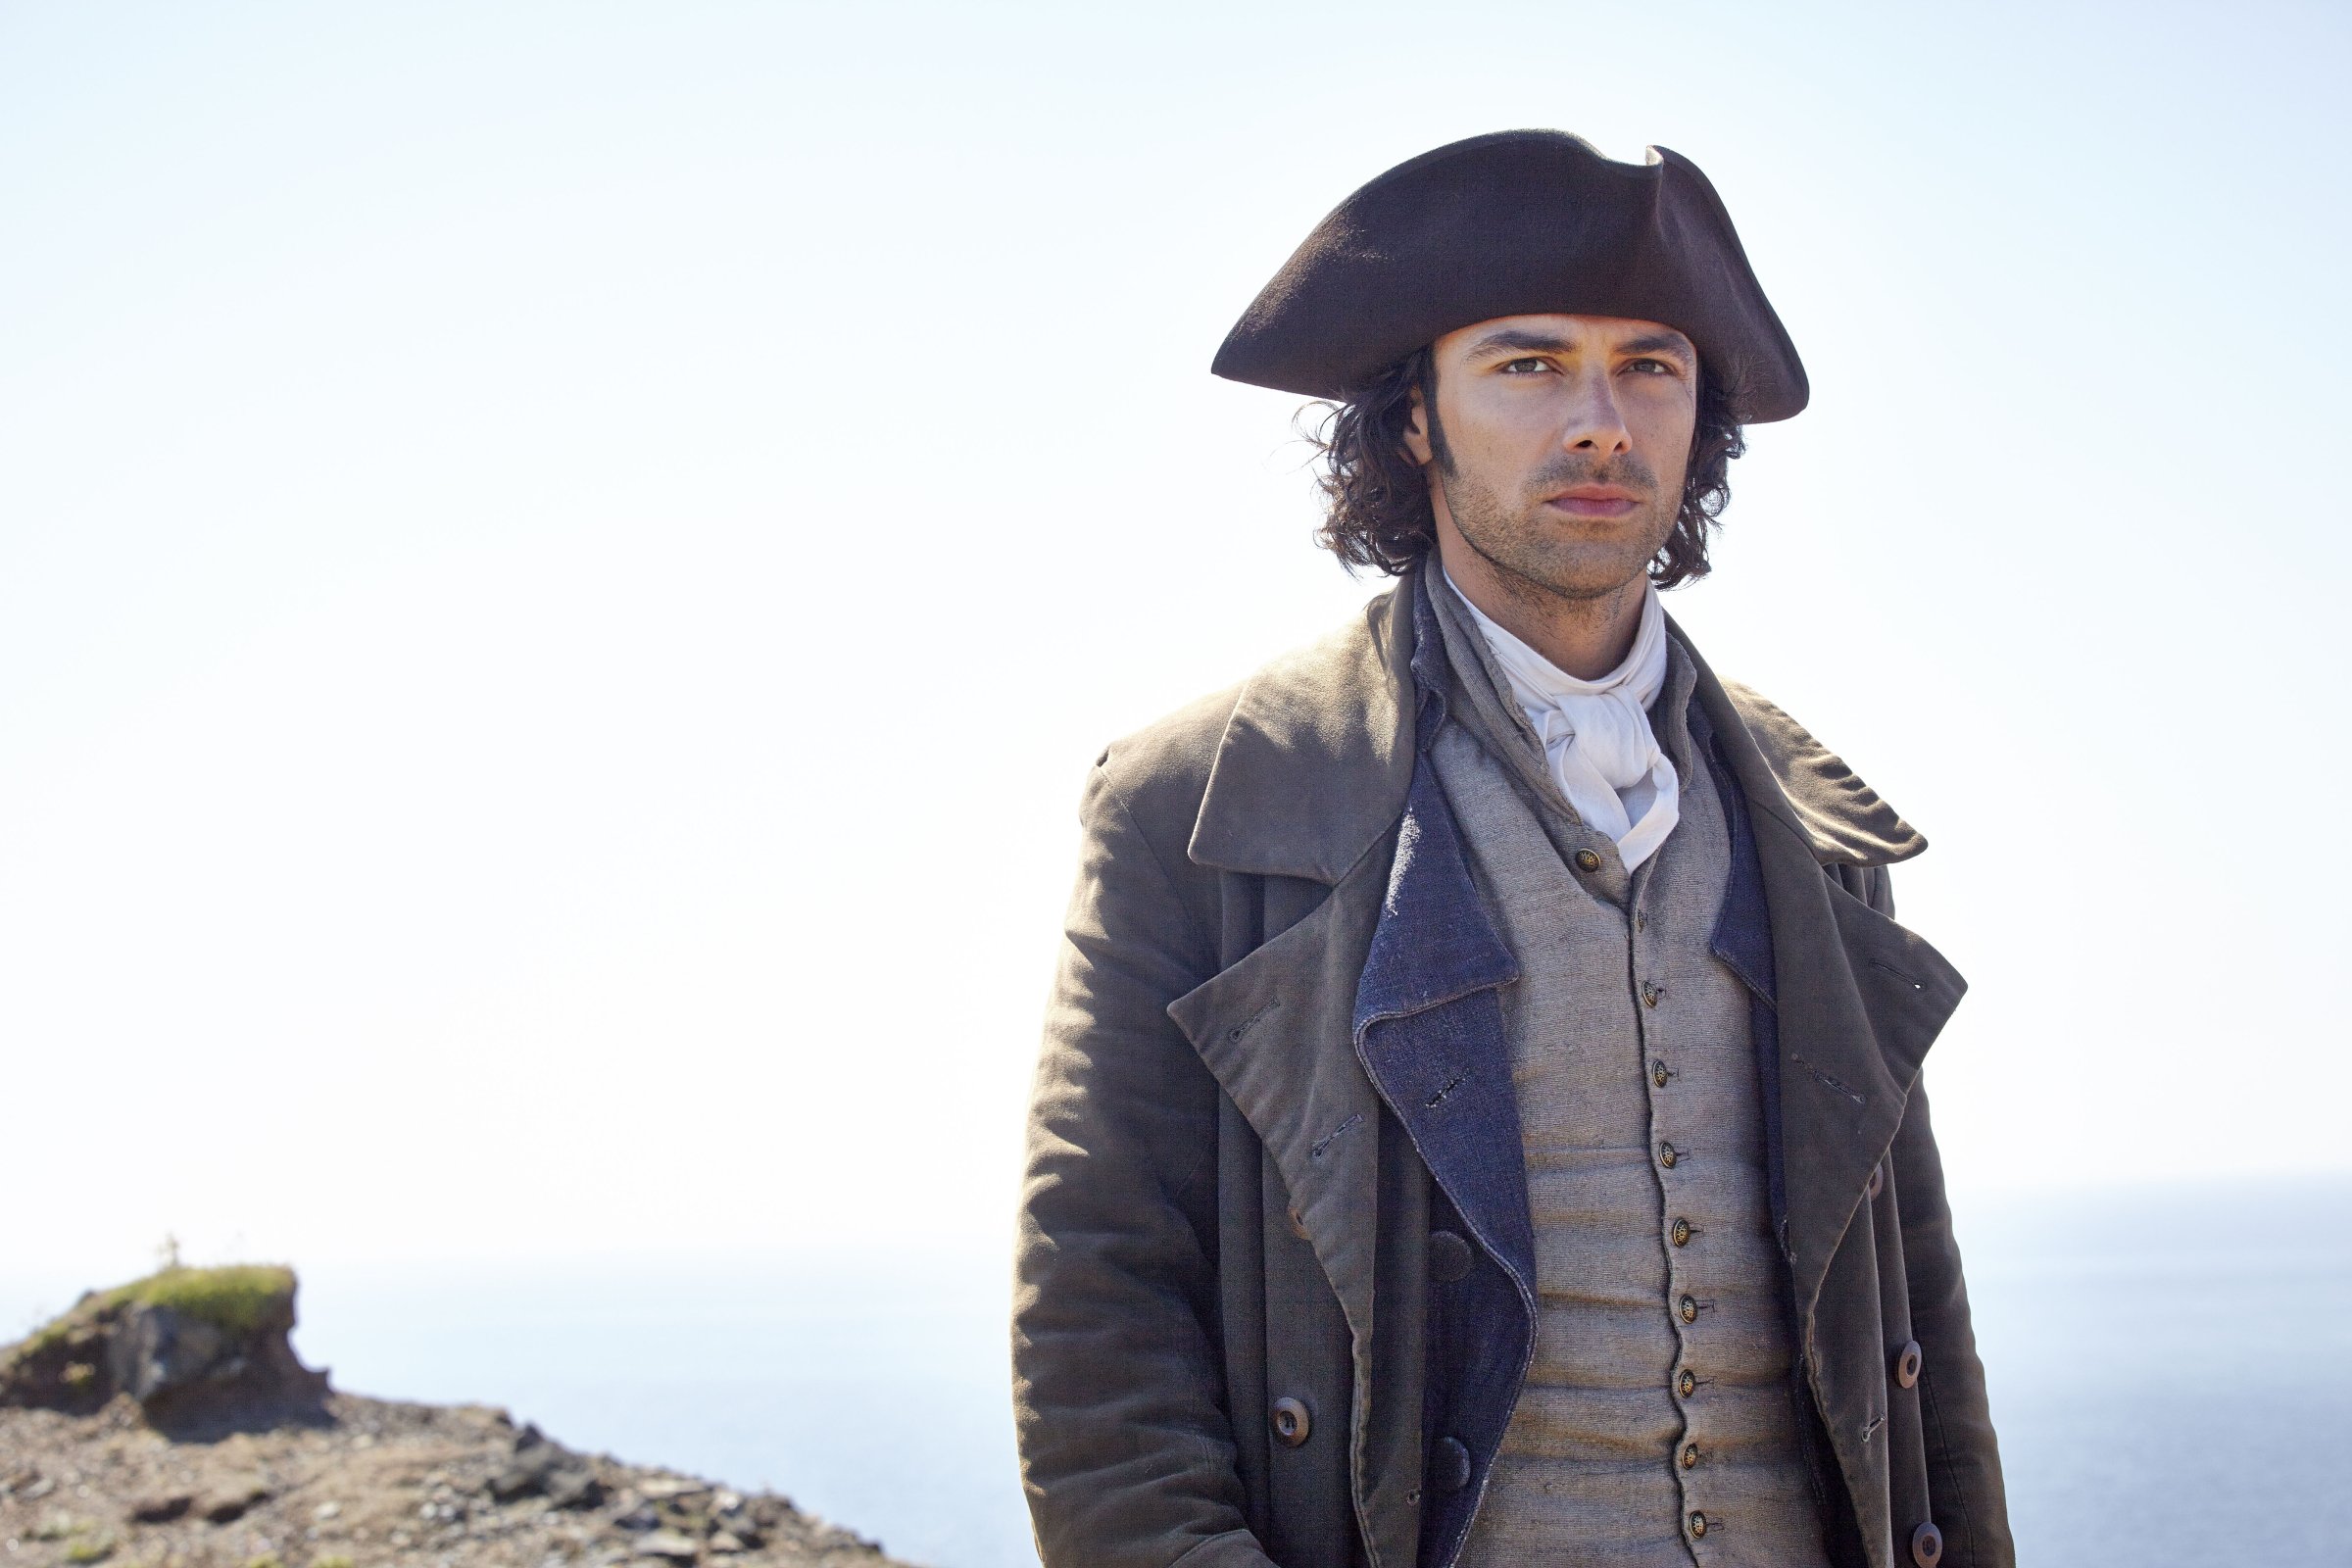 PoldarkSundays, June 21 - August 2, 2015 on MASTERPIECE on PBSRoss Poldark rides again in a swashbuckling newÊadaptation of the hit series that helped launch MASTERPIECE in theÊ1970s. AidanÊTurner (The Hobbit) stars as Captain Poldark, a redcoat who returns toÊCornwall after the AmericanÊRevolution and finds that his fighting days are farÊfrom over. Robin Ellis, who played Poldark in the 1970s PBS adaptation,Êappears inÊthe role of Reverend Halse. Eleanor Tomlinson (MASTERPIECE ÒDeath Comes to PemberleyÓ) plays the spunky Cornish minerÕsÊdaughter takenÊin by the gallant captain.ÊShown: Aidan Turner as Ross Poldark(C) Robert Viglasky/Mammoth Screen for MASTERPIECEThis image may be used only in the direct promotion of MASTERPIECE. No other rights are granted. All rights are reserved. Editorial use only.